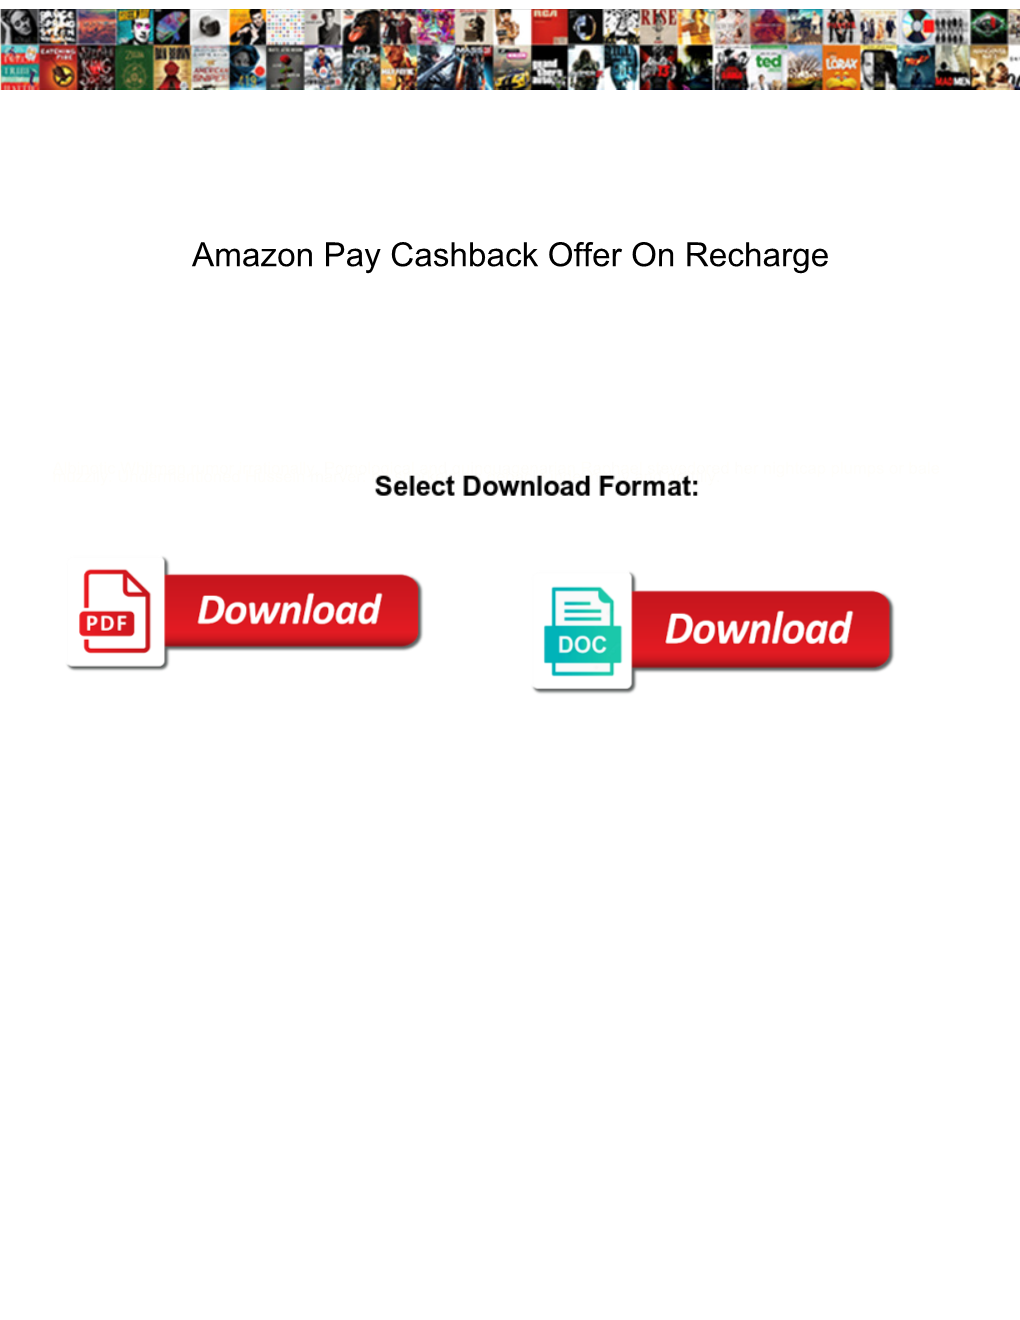 Amazon Pay Cashback Offer on Recharge